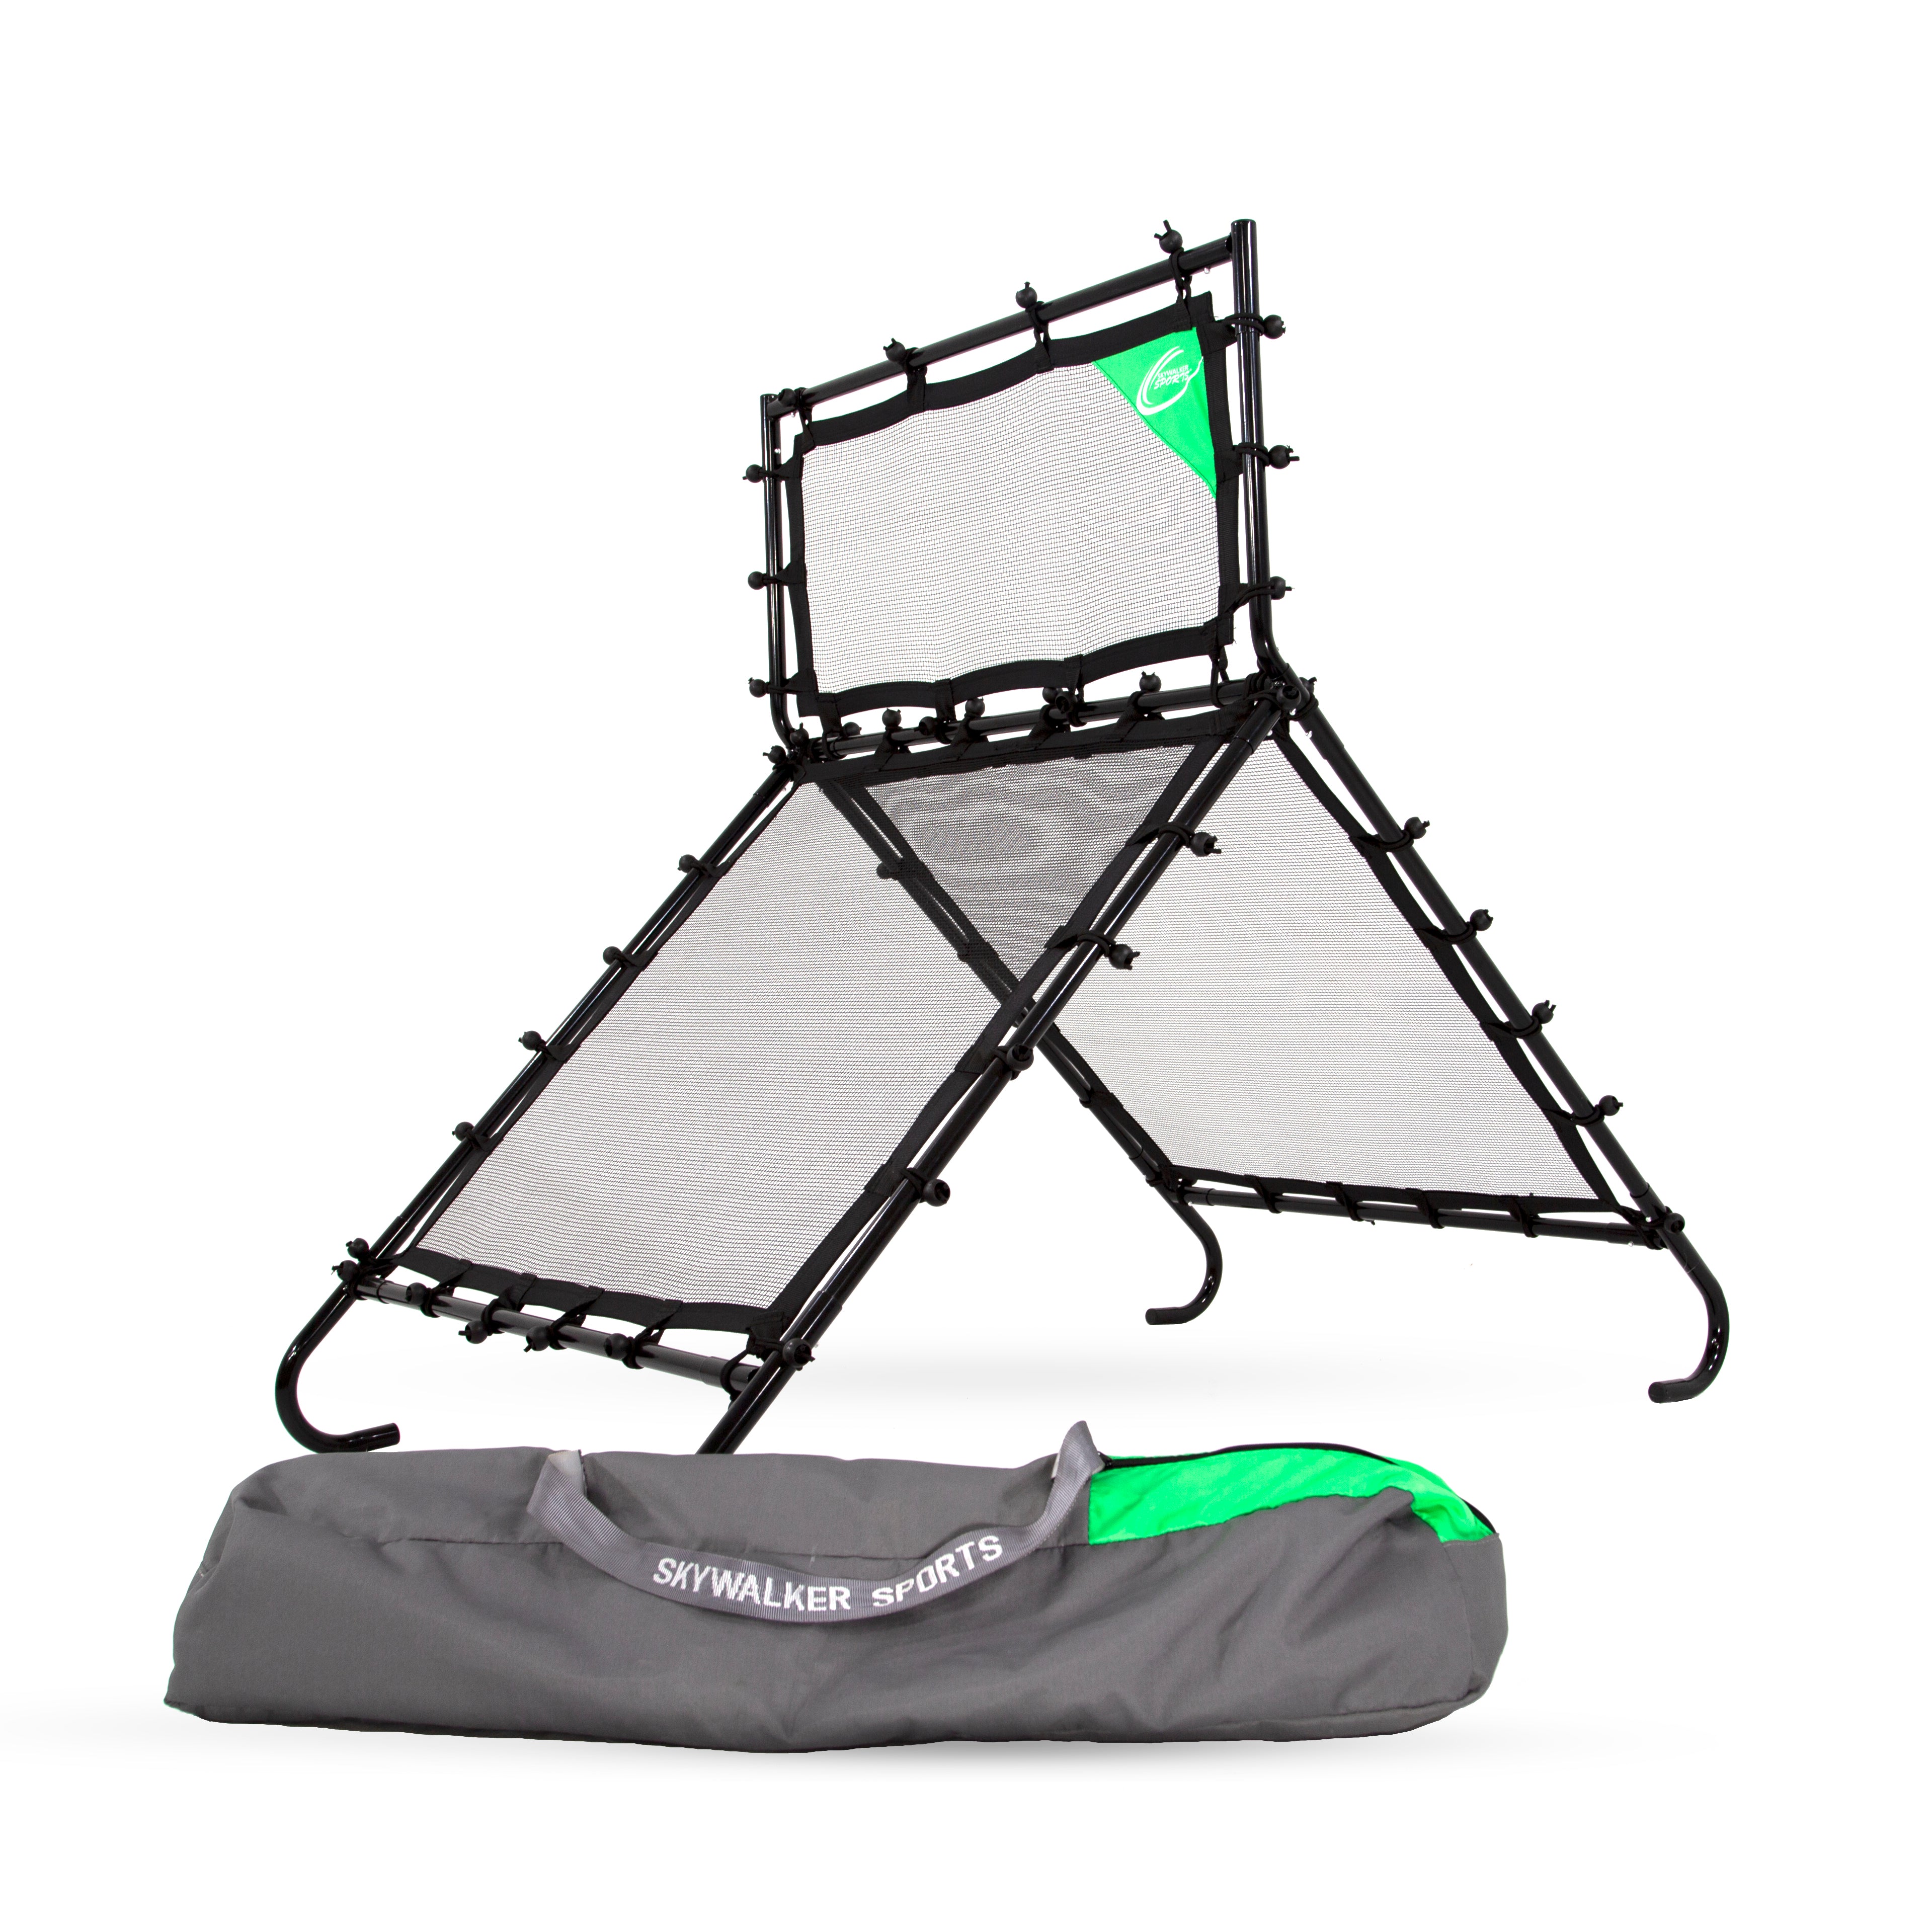 The Multi-Sport Training Rebounder with its gray and green Skywalker Sports carrying case in front of it.